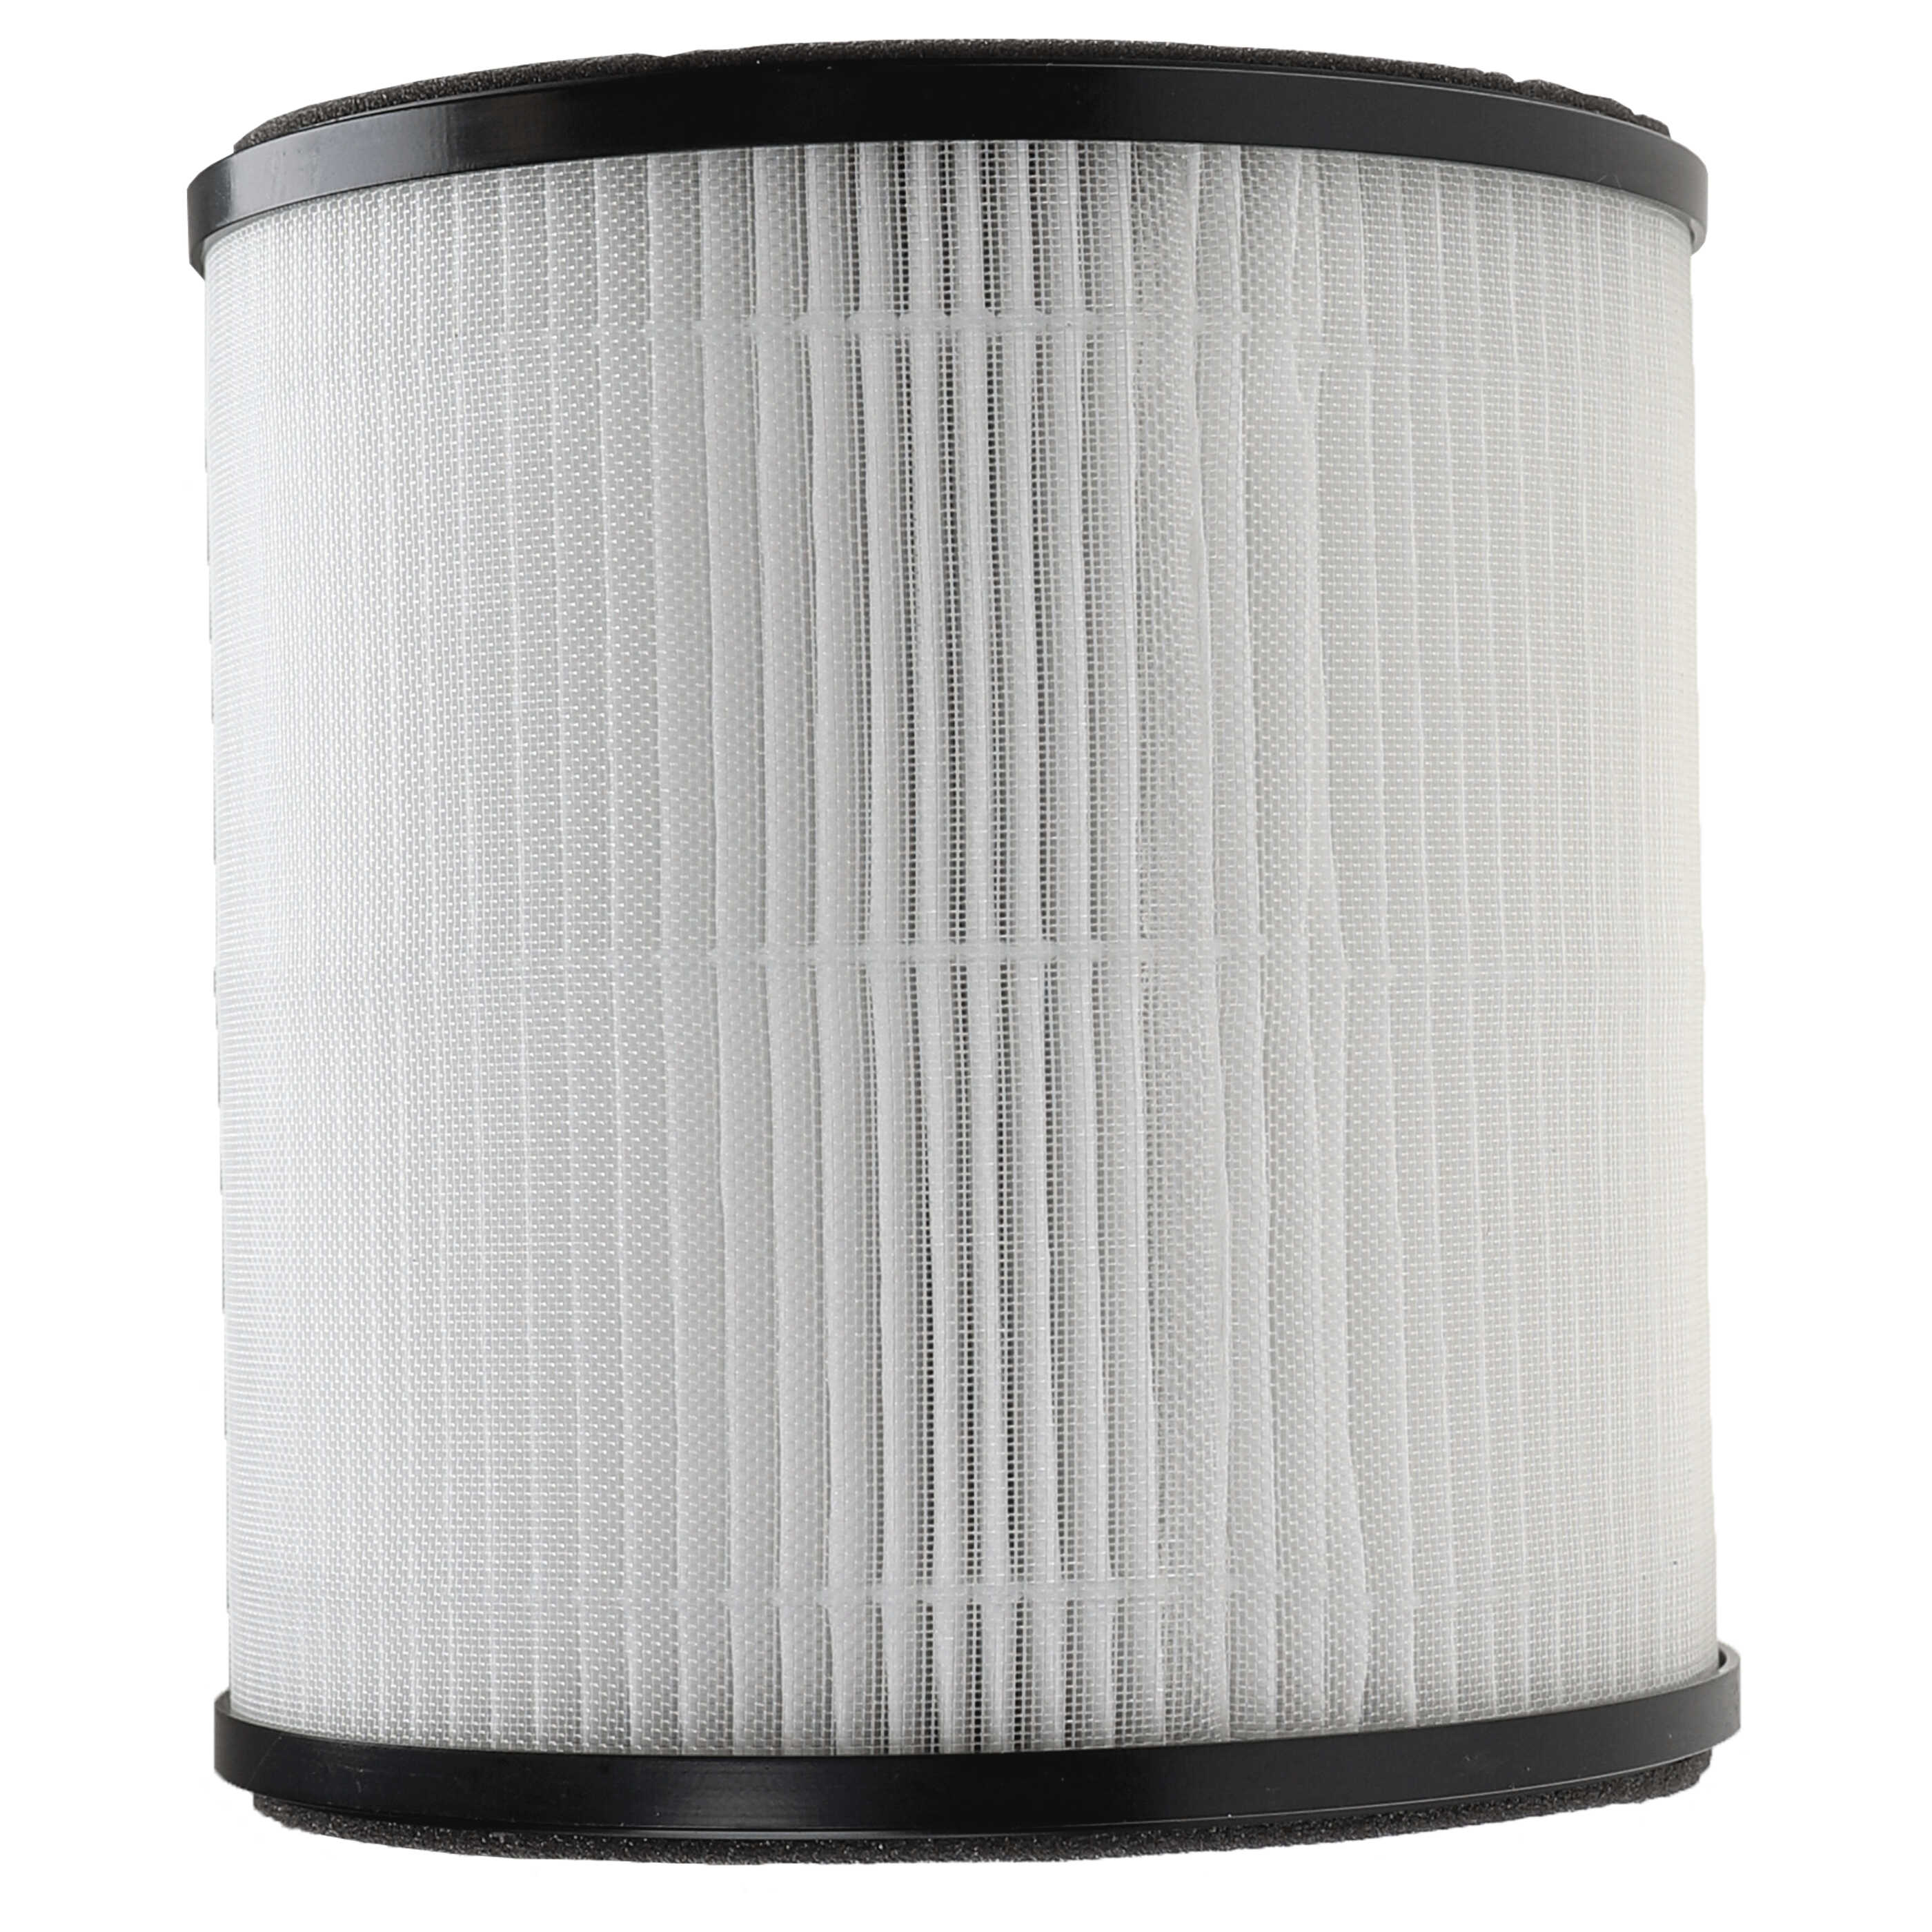 Filter for Acekool, DIKI, Nobebird B-D02F Air Purifier etc. - Pre Filter + HEPA + Activated Carbon